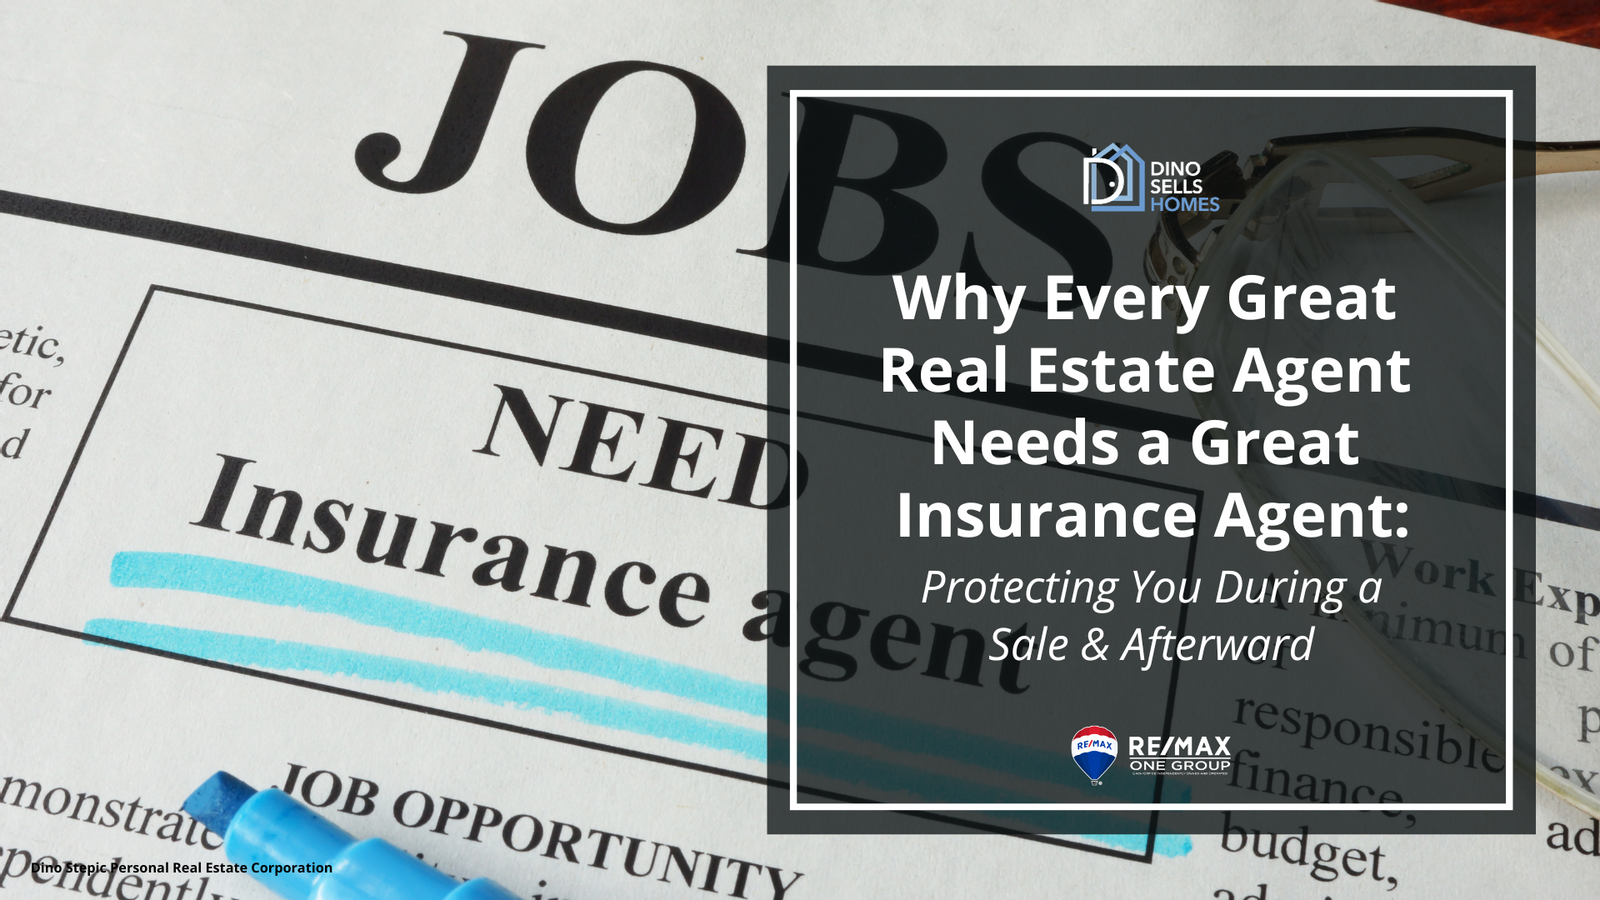 Why Every Great Real Estate Agent Needs a Great Insurance Agent